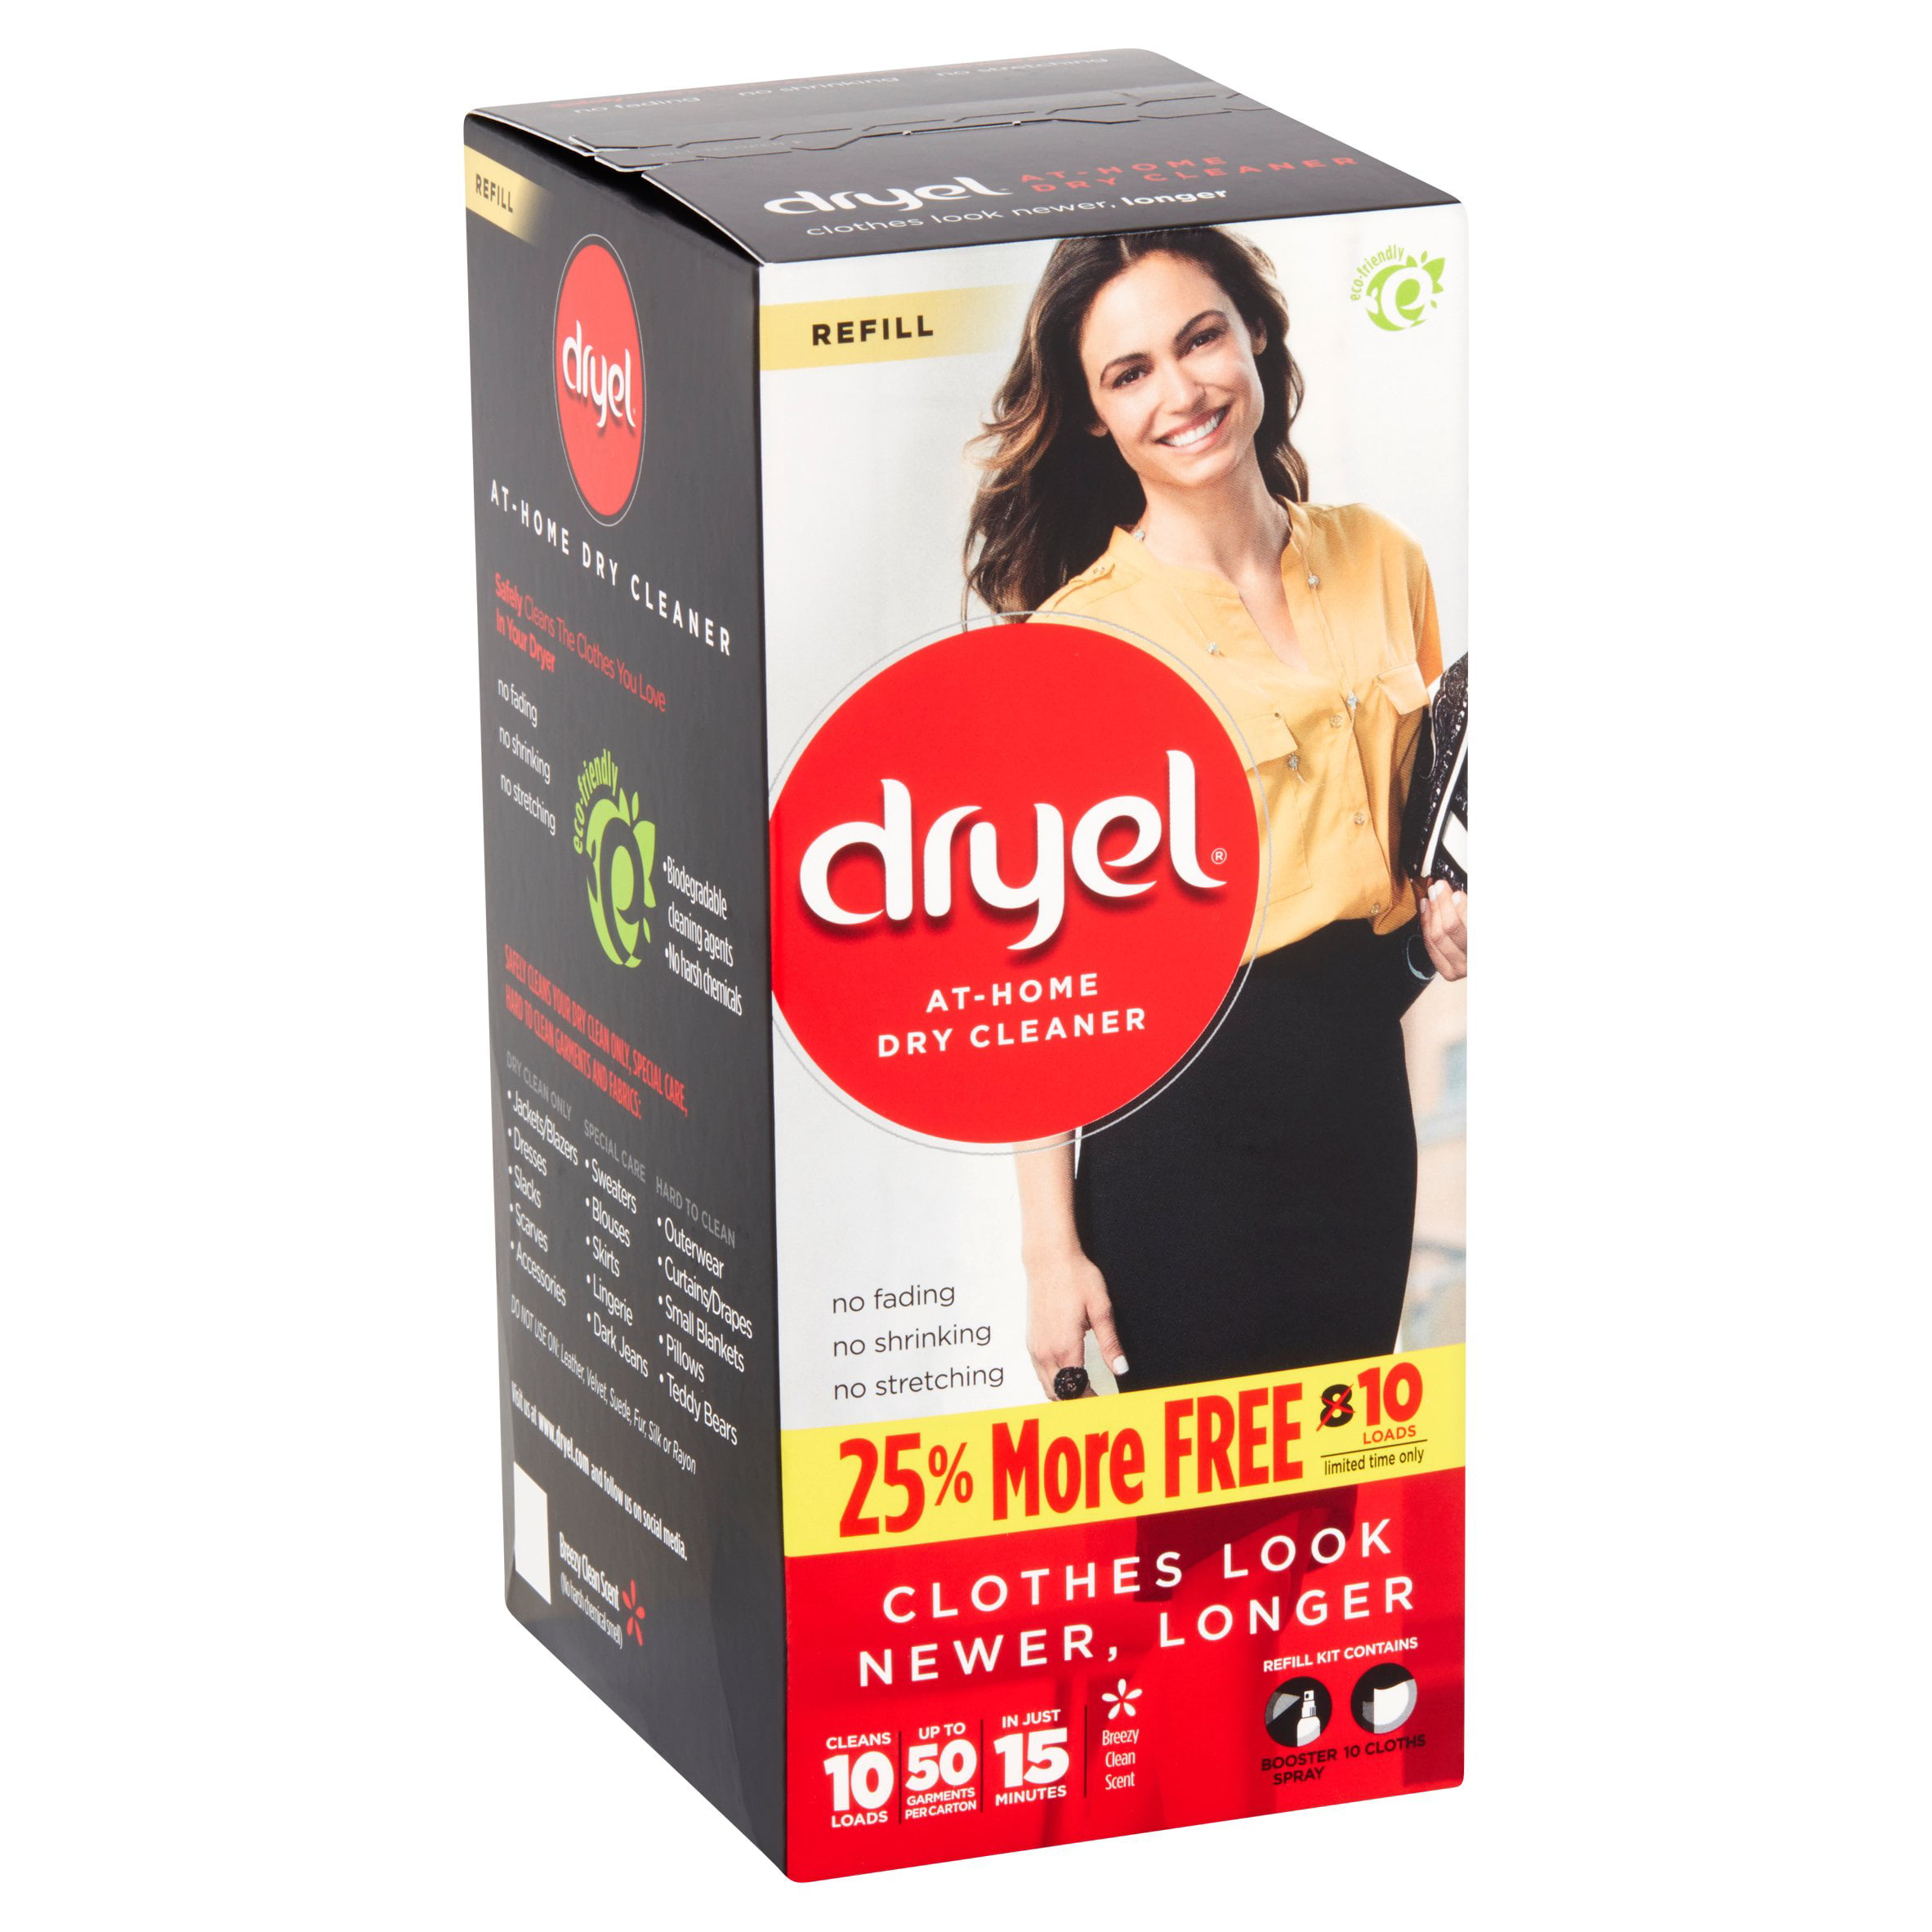 Dryel: At-Home Dry Cleaning Ultracleaning Clean Breeze Scent Refill Cloths,  6 ct 